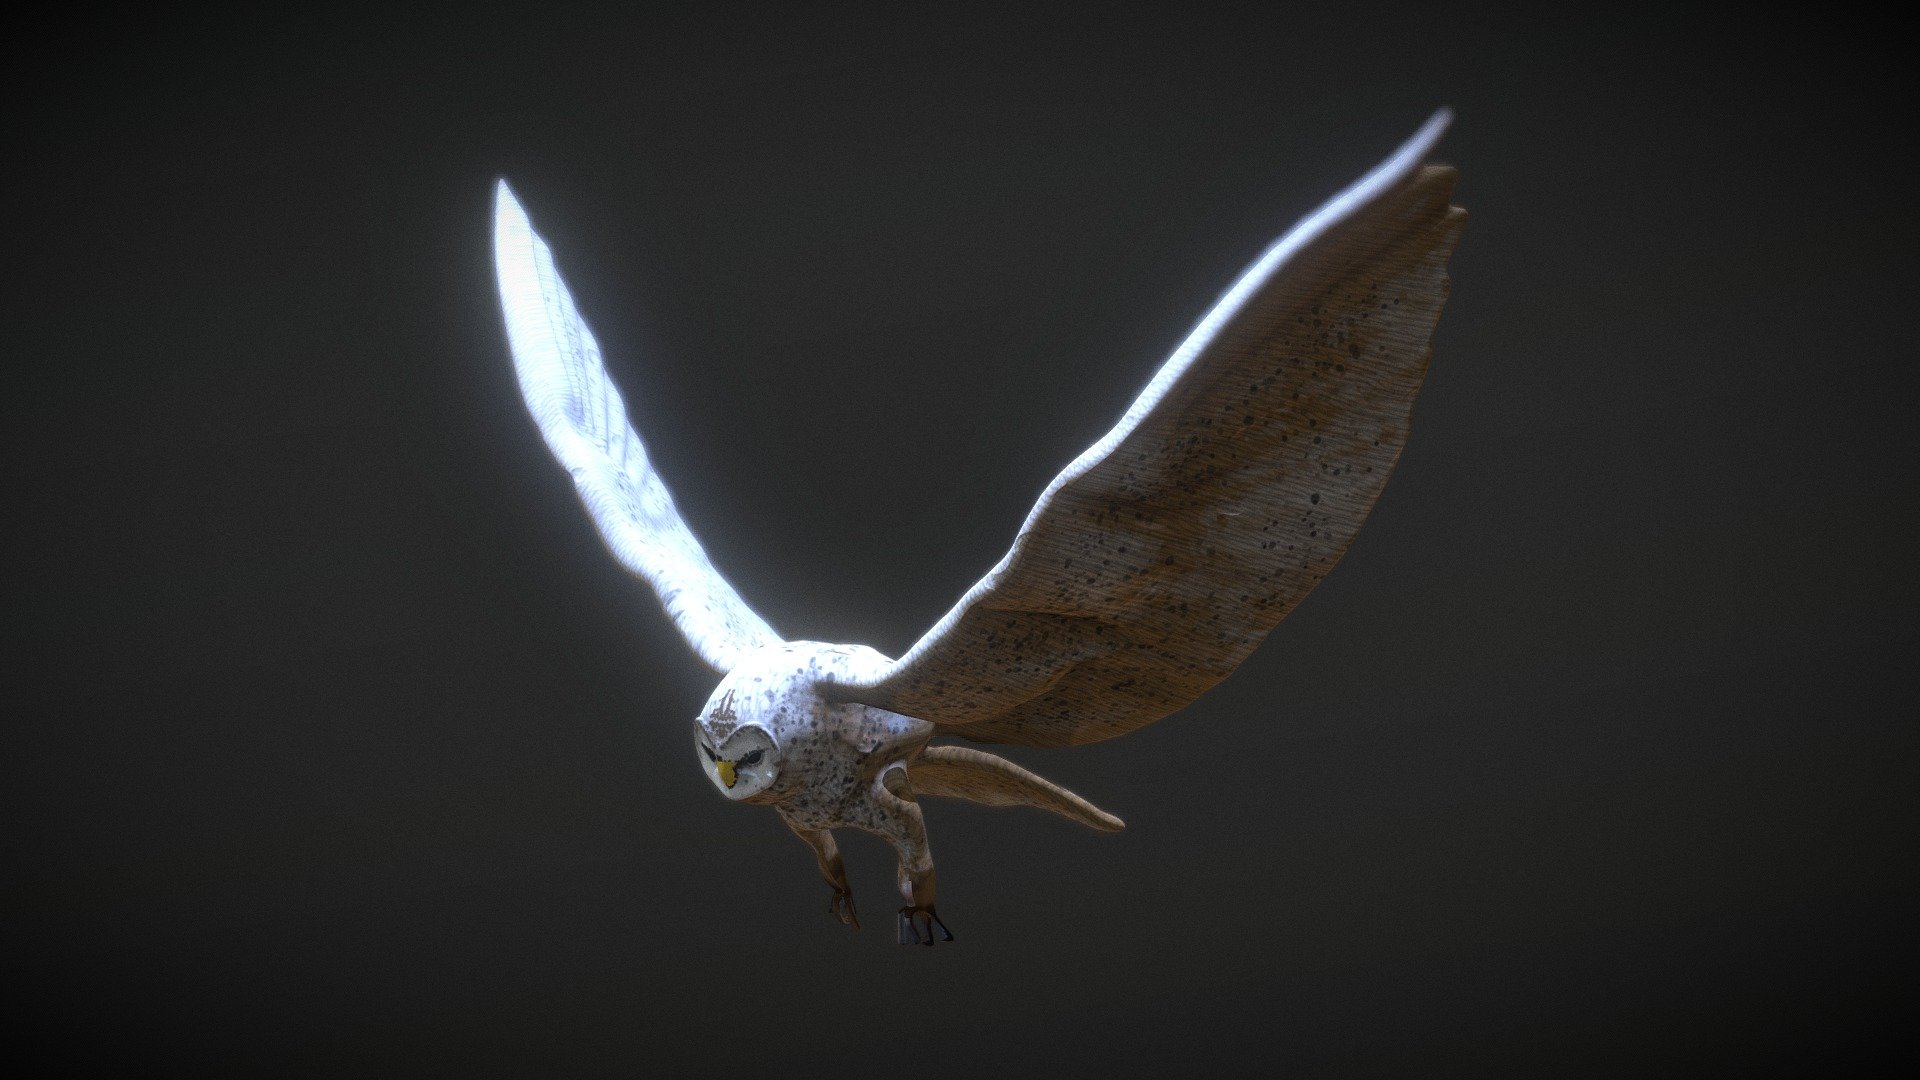 Night Owl looking for the hunt.
Animated and rigged Owl.
Made in Blender
Textured in Substance Painter

Model can be downloaded at: https://bit.ly/3WXgMSs - Animated and rigged Owl - 3D model by Amit.Rotem 3d model